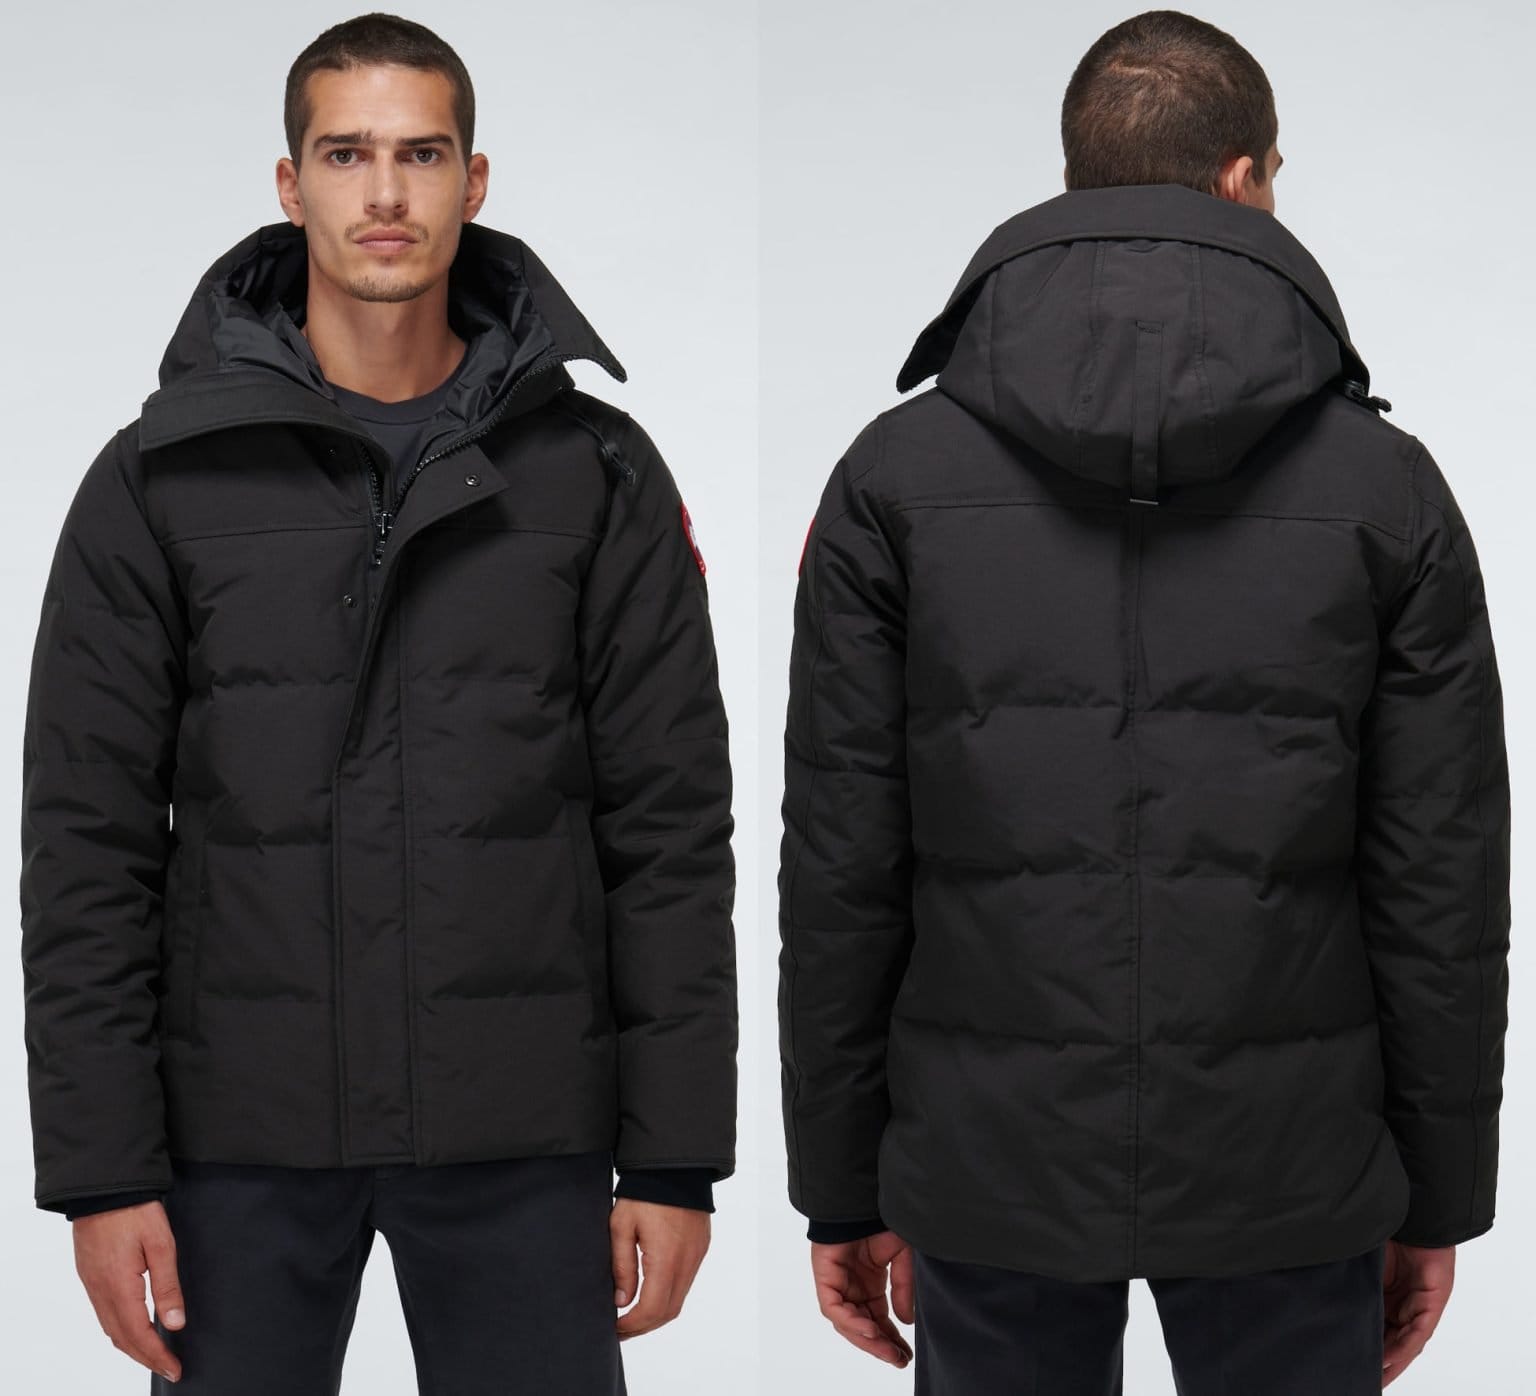 Canada Goose's 9 Warmest Bomber Jackets to Buy in 2022